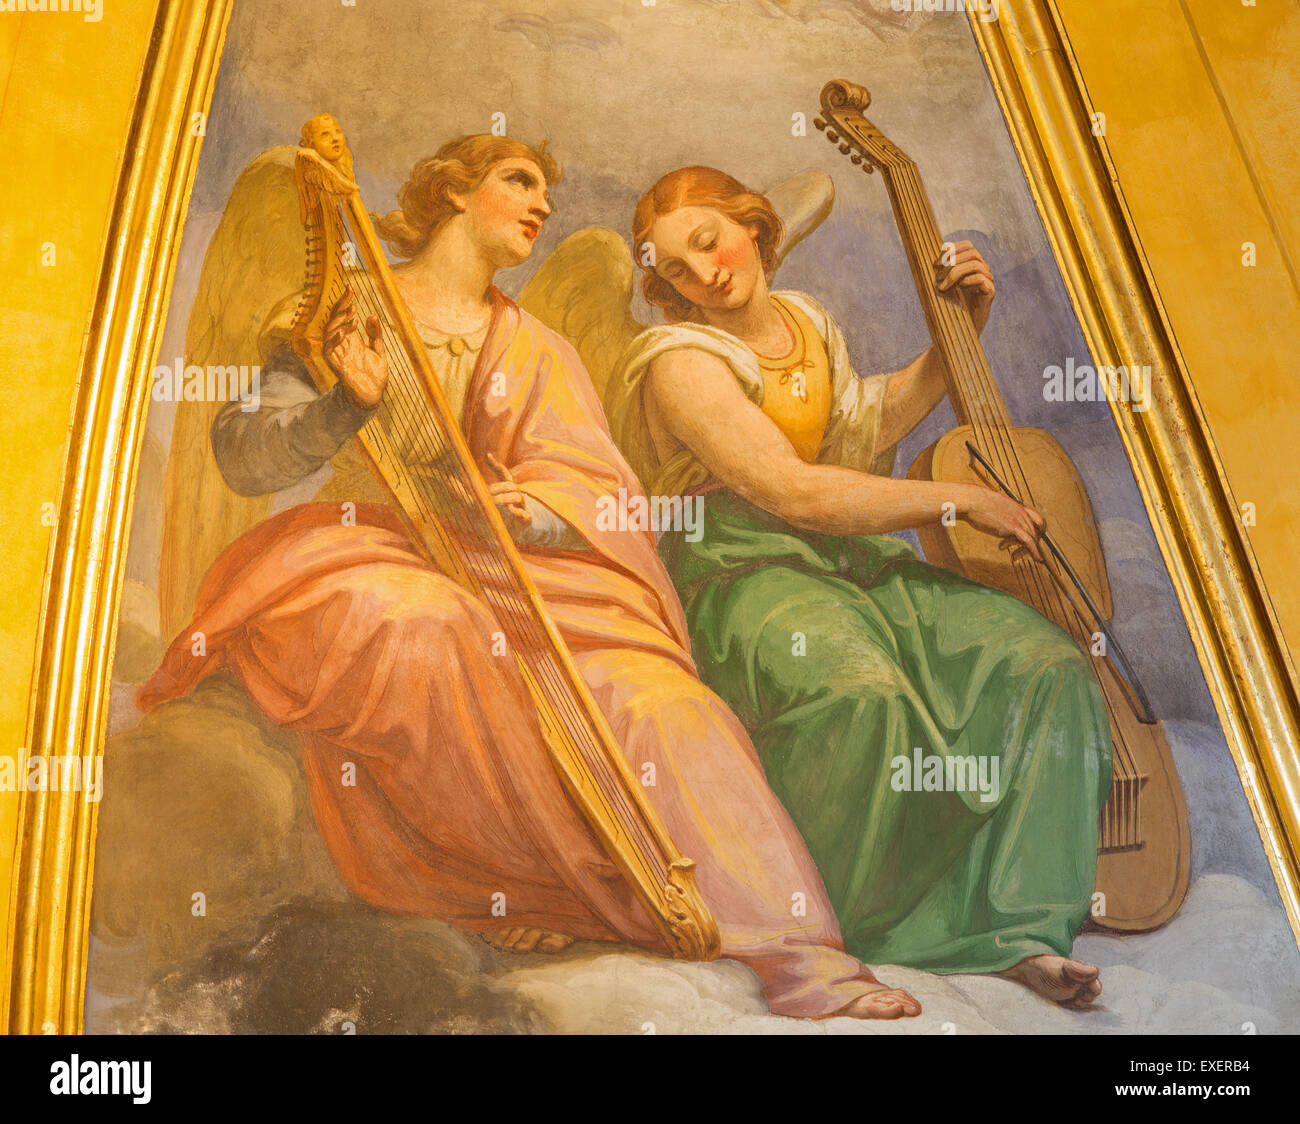 ROME, ITALY - MARCH 26, 2015: The fresco of angels wiht the music instruments in Basilica di Sant Agostino Stock Photo